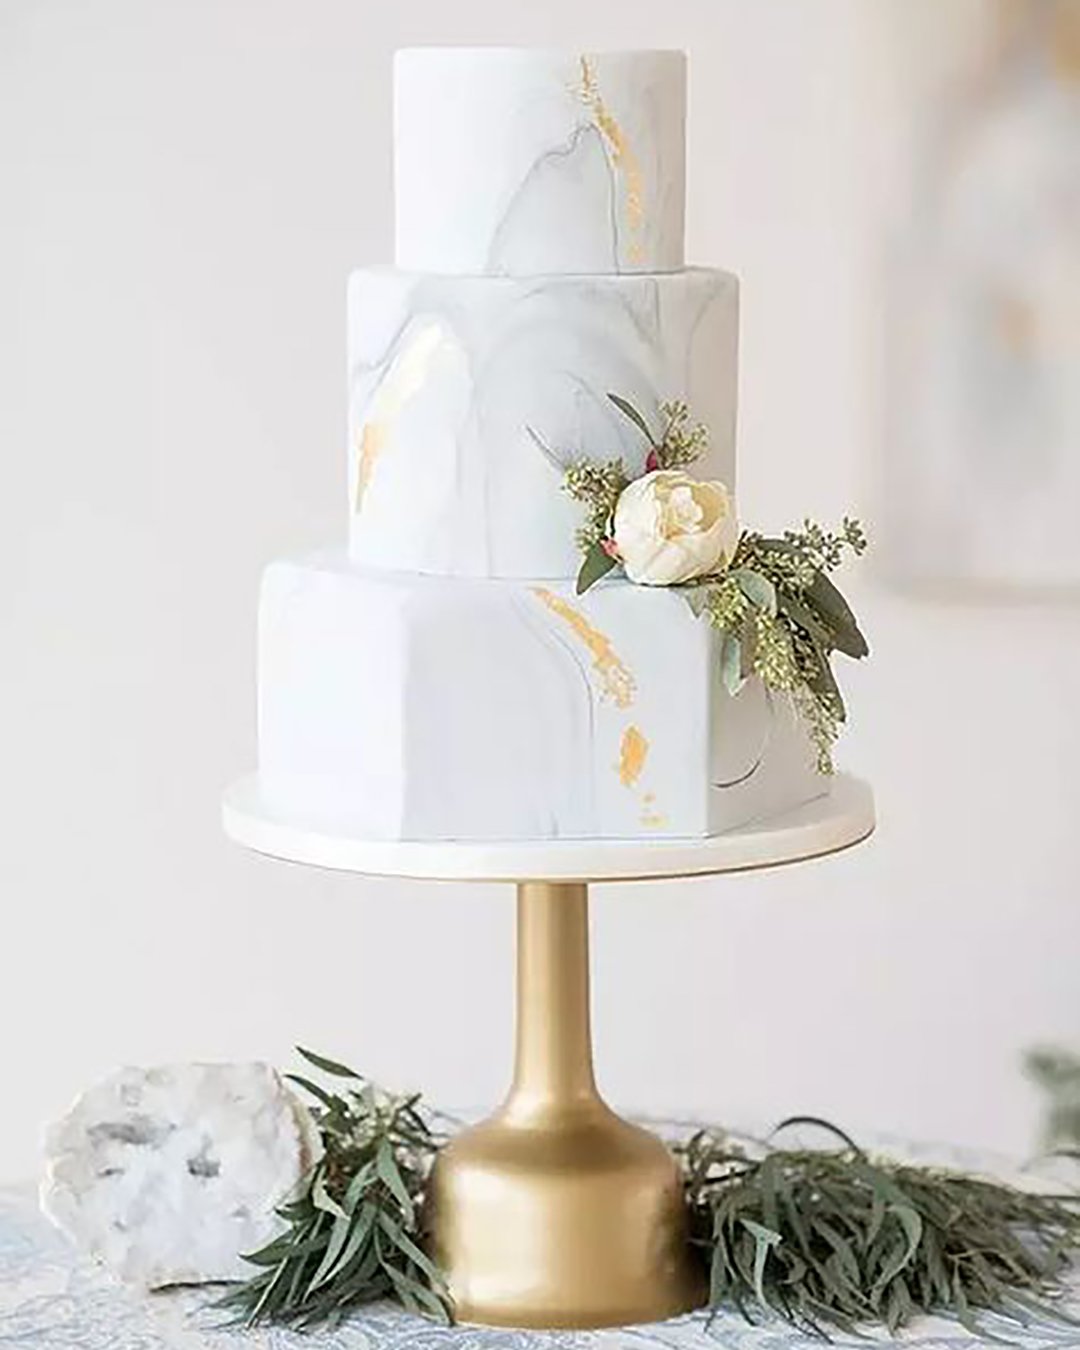 marble wedding cakes three tiered with golden elements and a delicate white flower with greens elegant wedding magazine via instagram